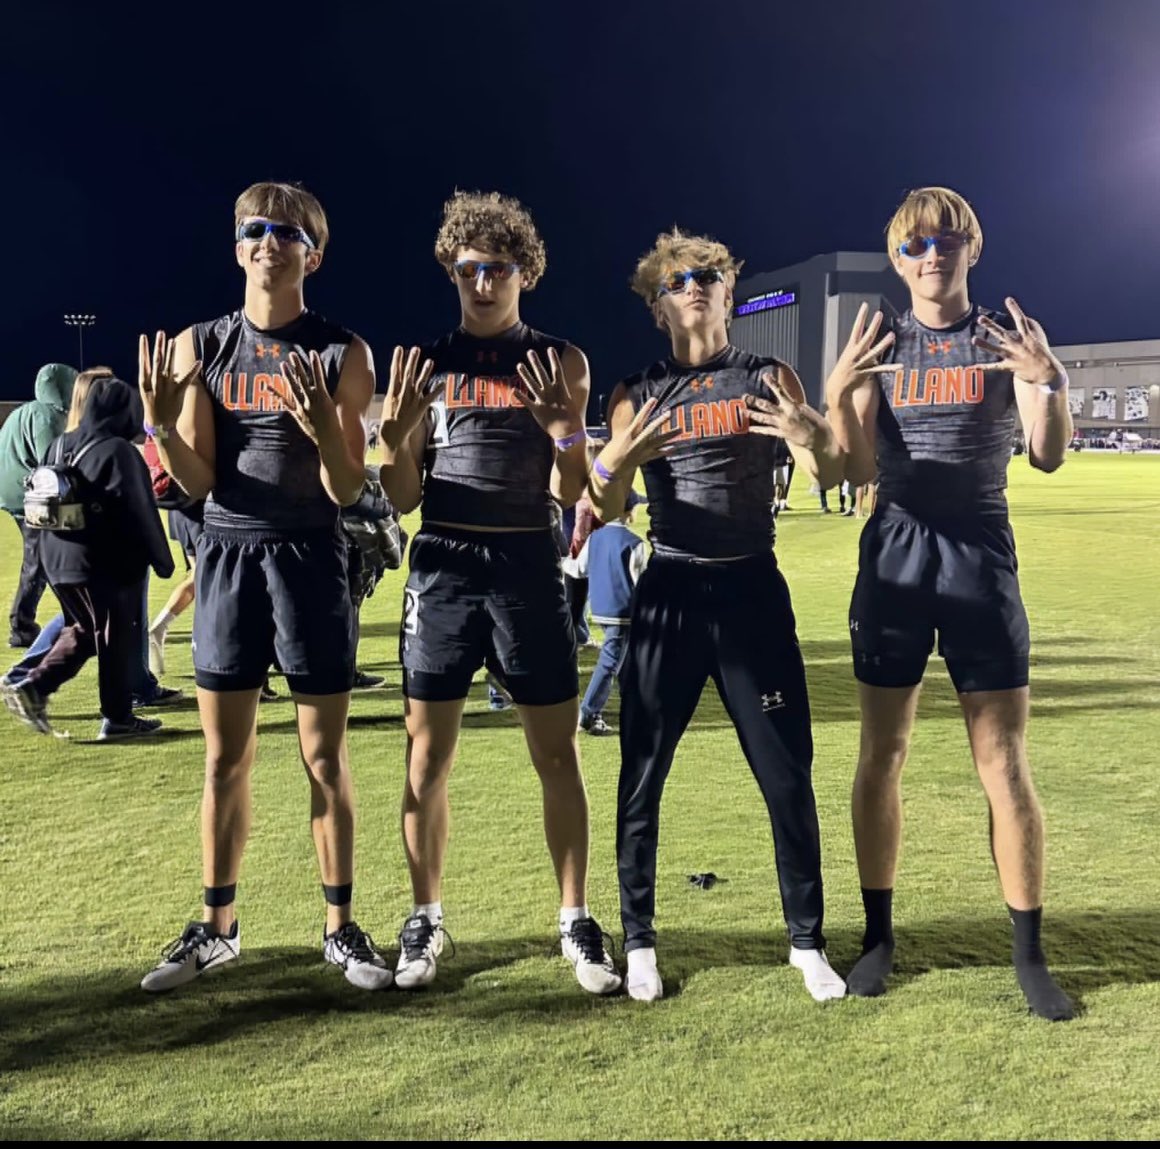 Good luck to our boys 4x400 today competing in the Regional finals today in Abilene. 

Alex Kachura
Charlie White
JD Friday
Aiden Bueke